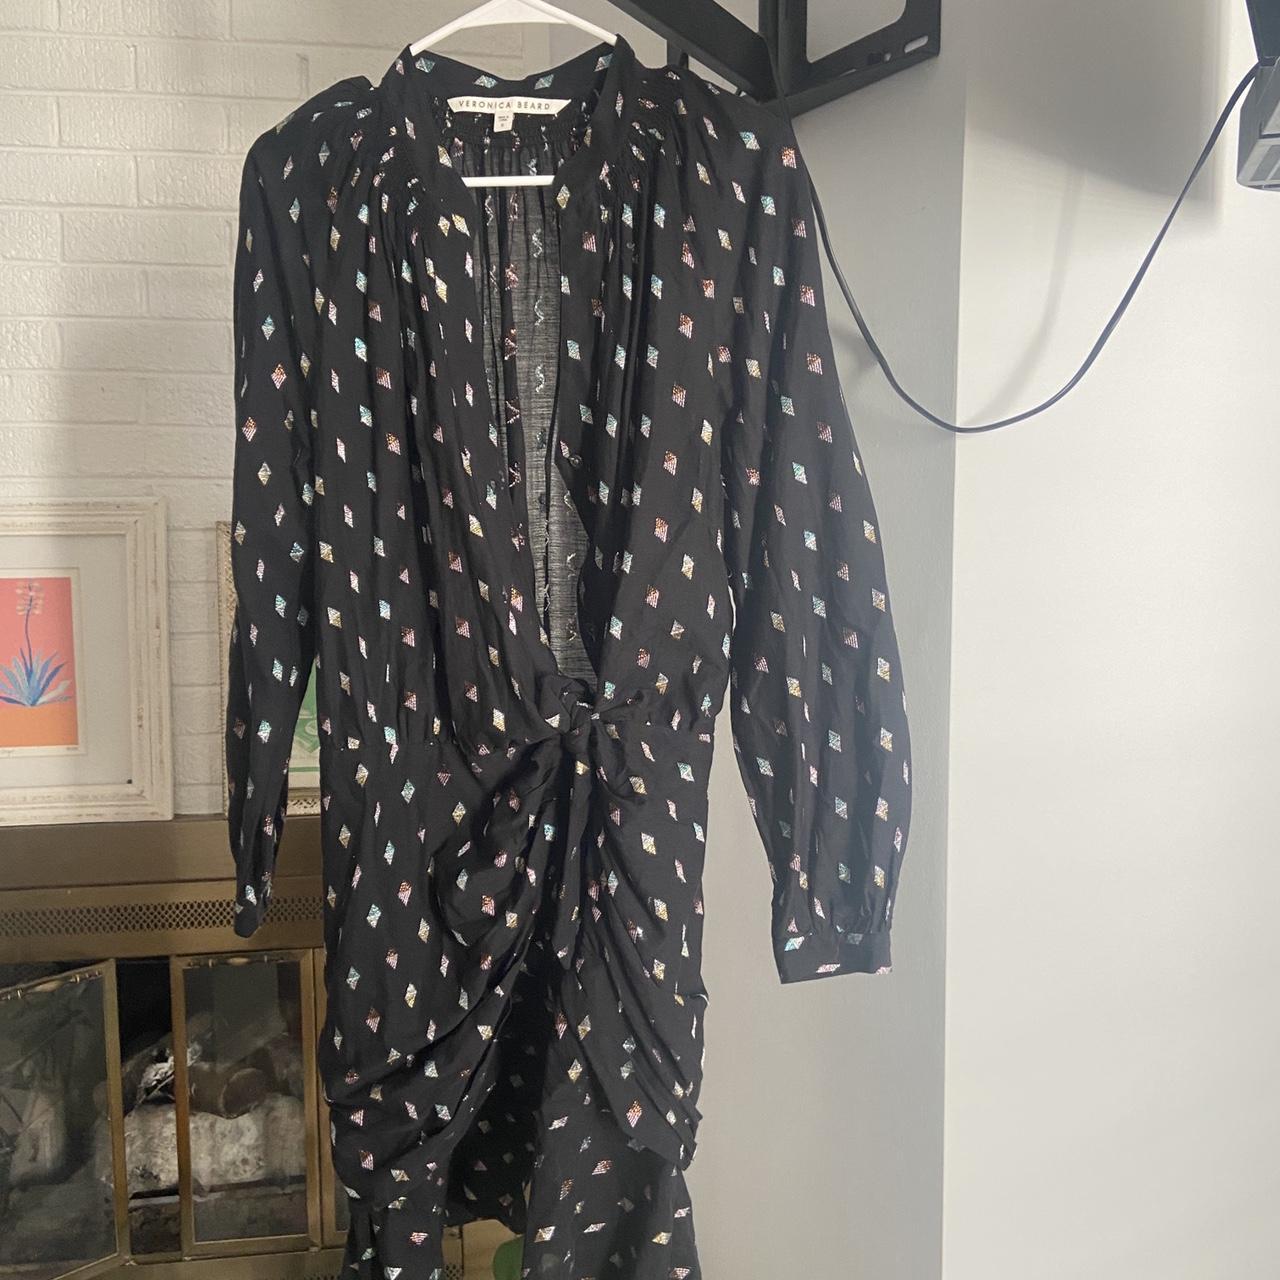 Veronica beard dress. Got from the real real in... - Depop